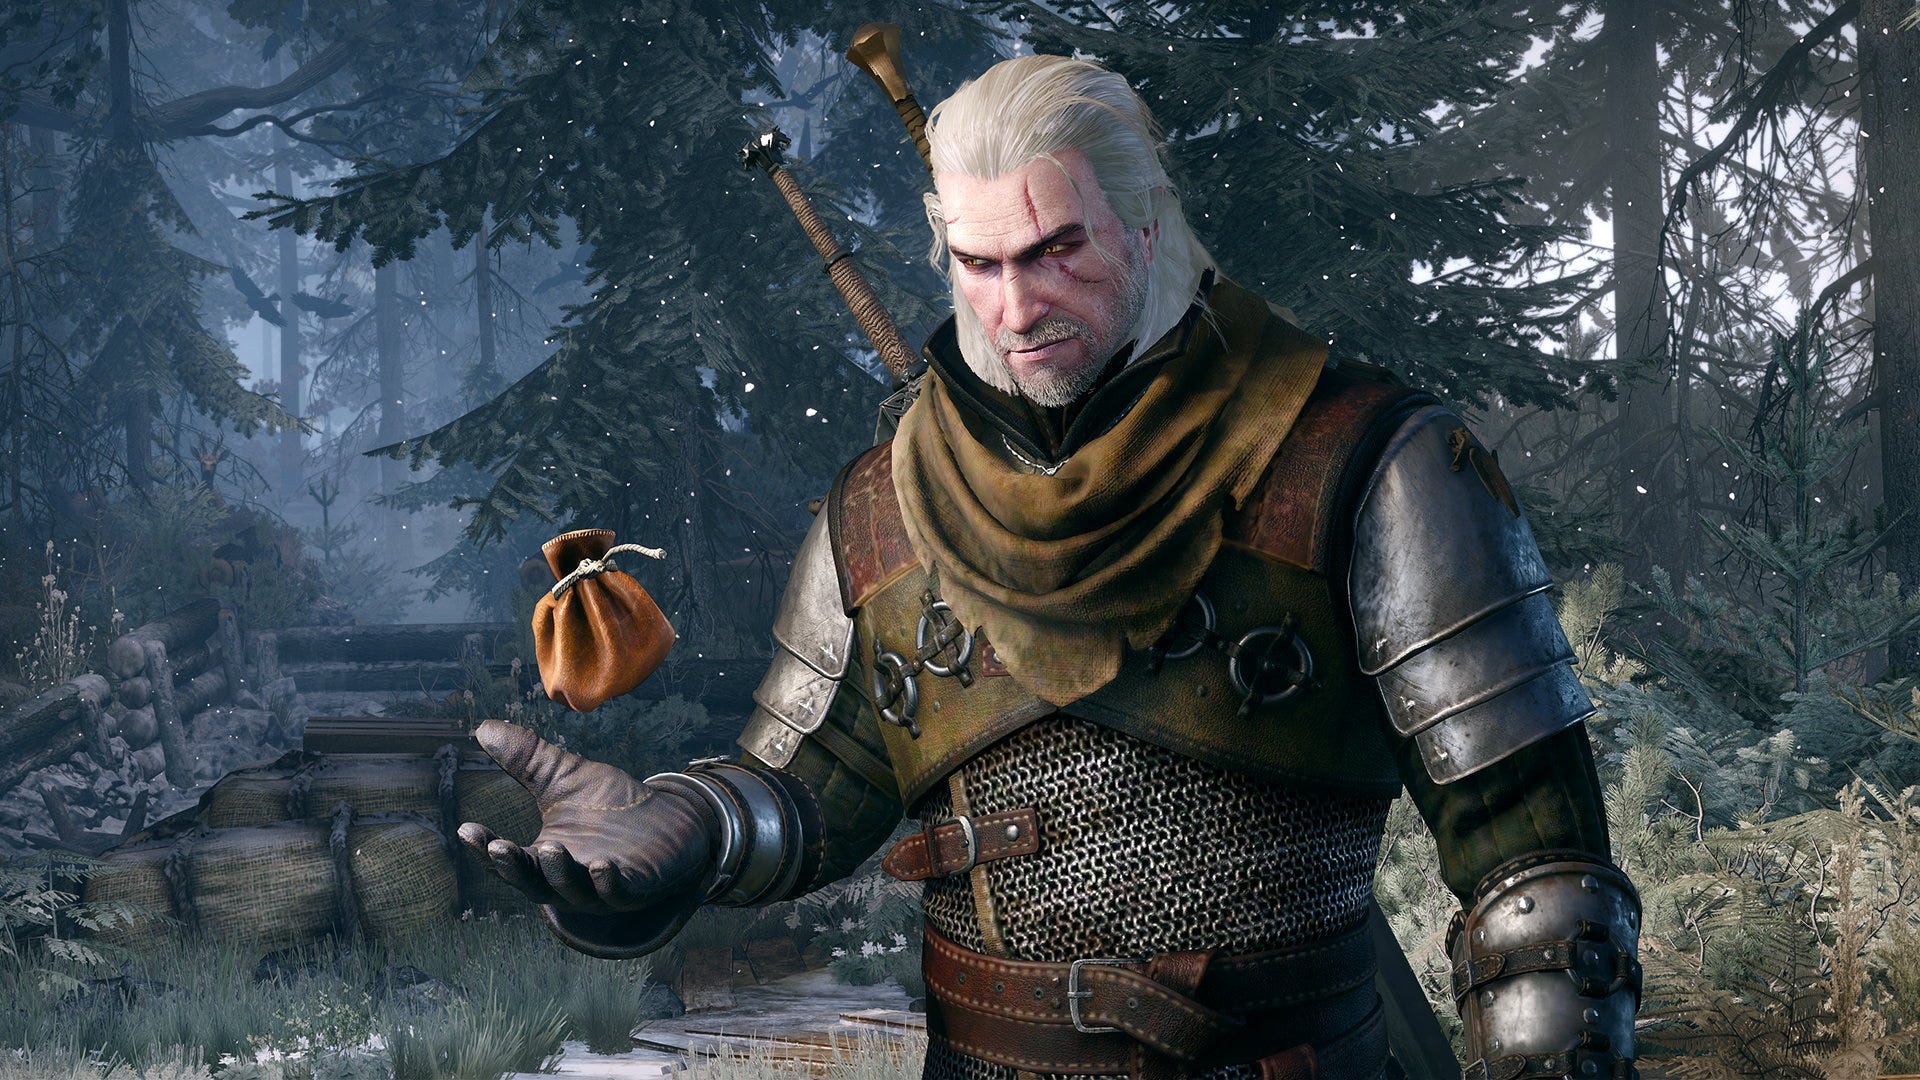 cd-projekt-red-still-'don't-see-a-place-for-microtransactions'-in-singleplayer-games